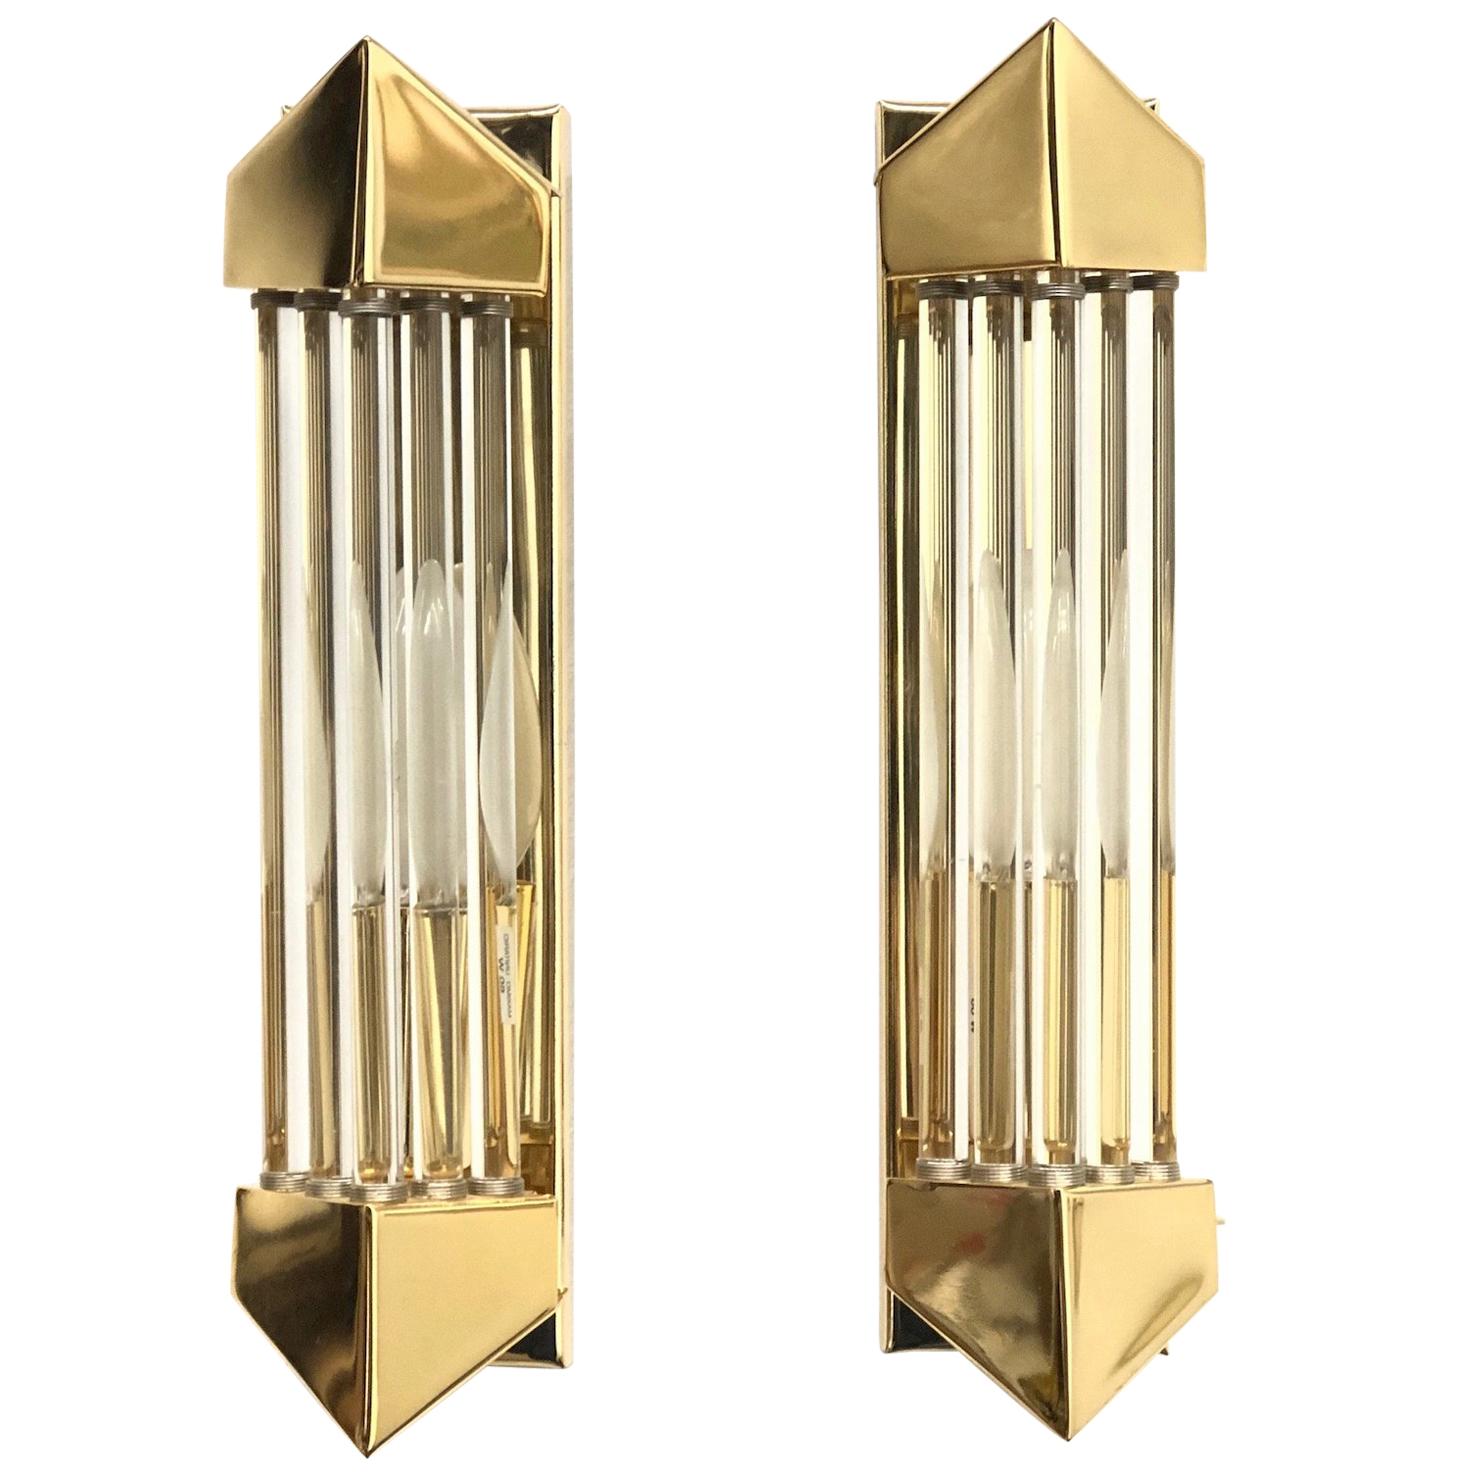 Pair of Brass and Glass Rod Wall Sconces Art Deco Style, Honsel Germany